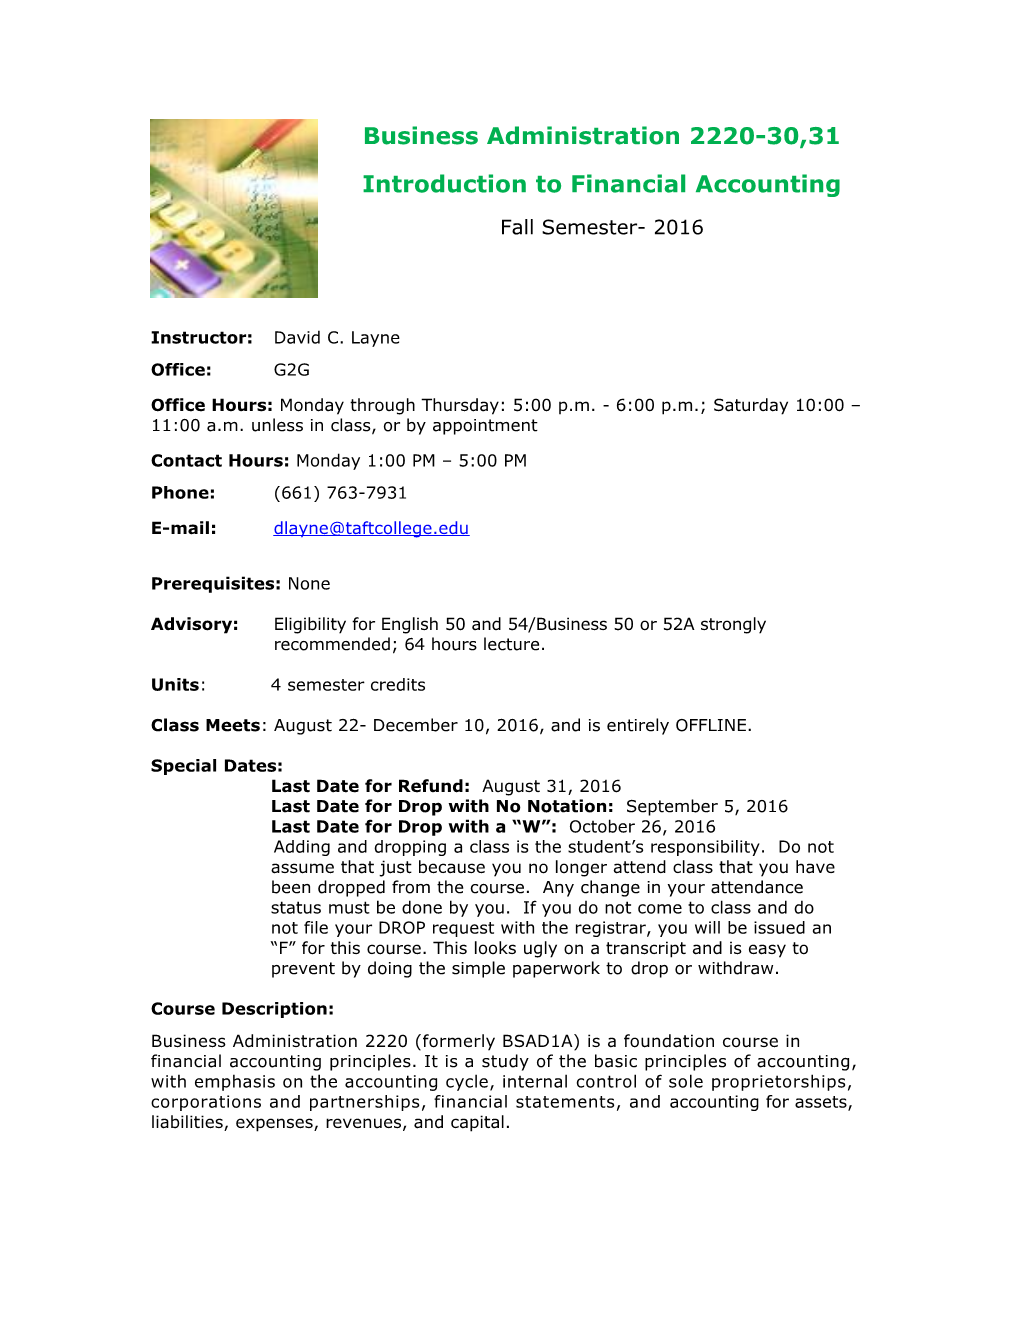 Business Administration 2220 Introduction to Financial Accounting